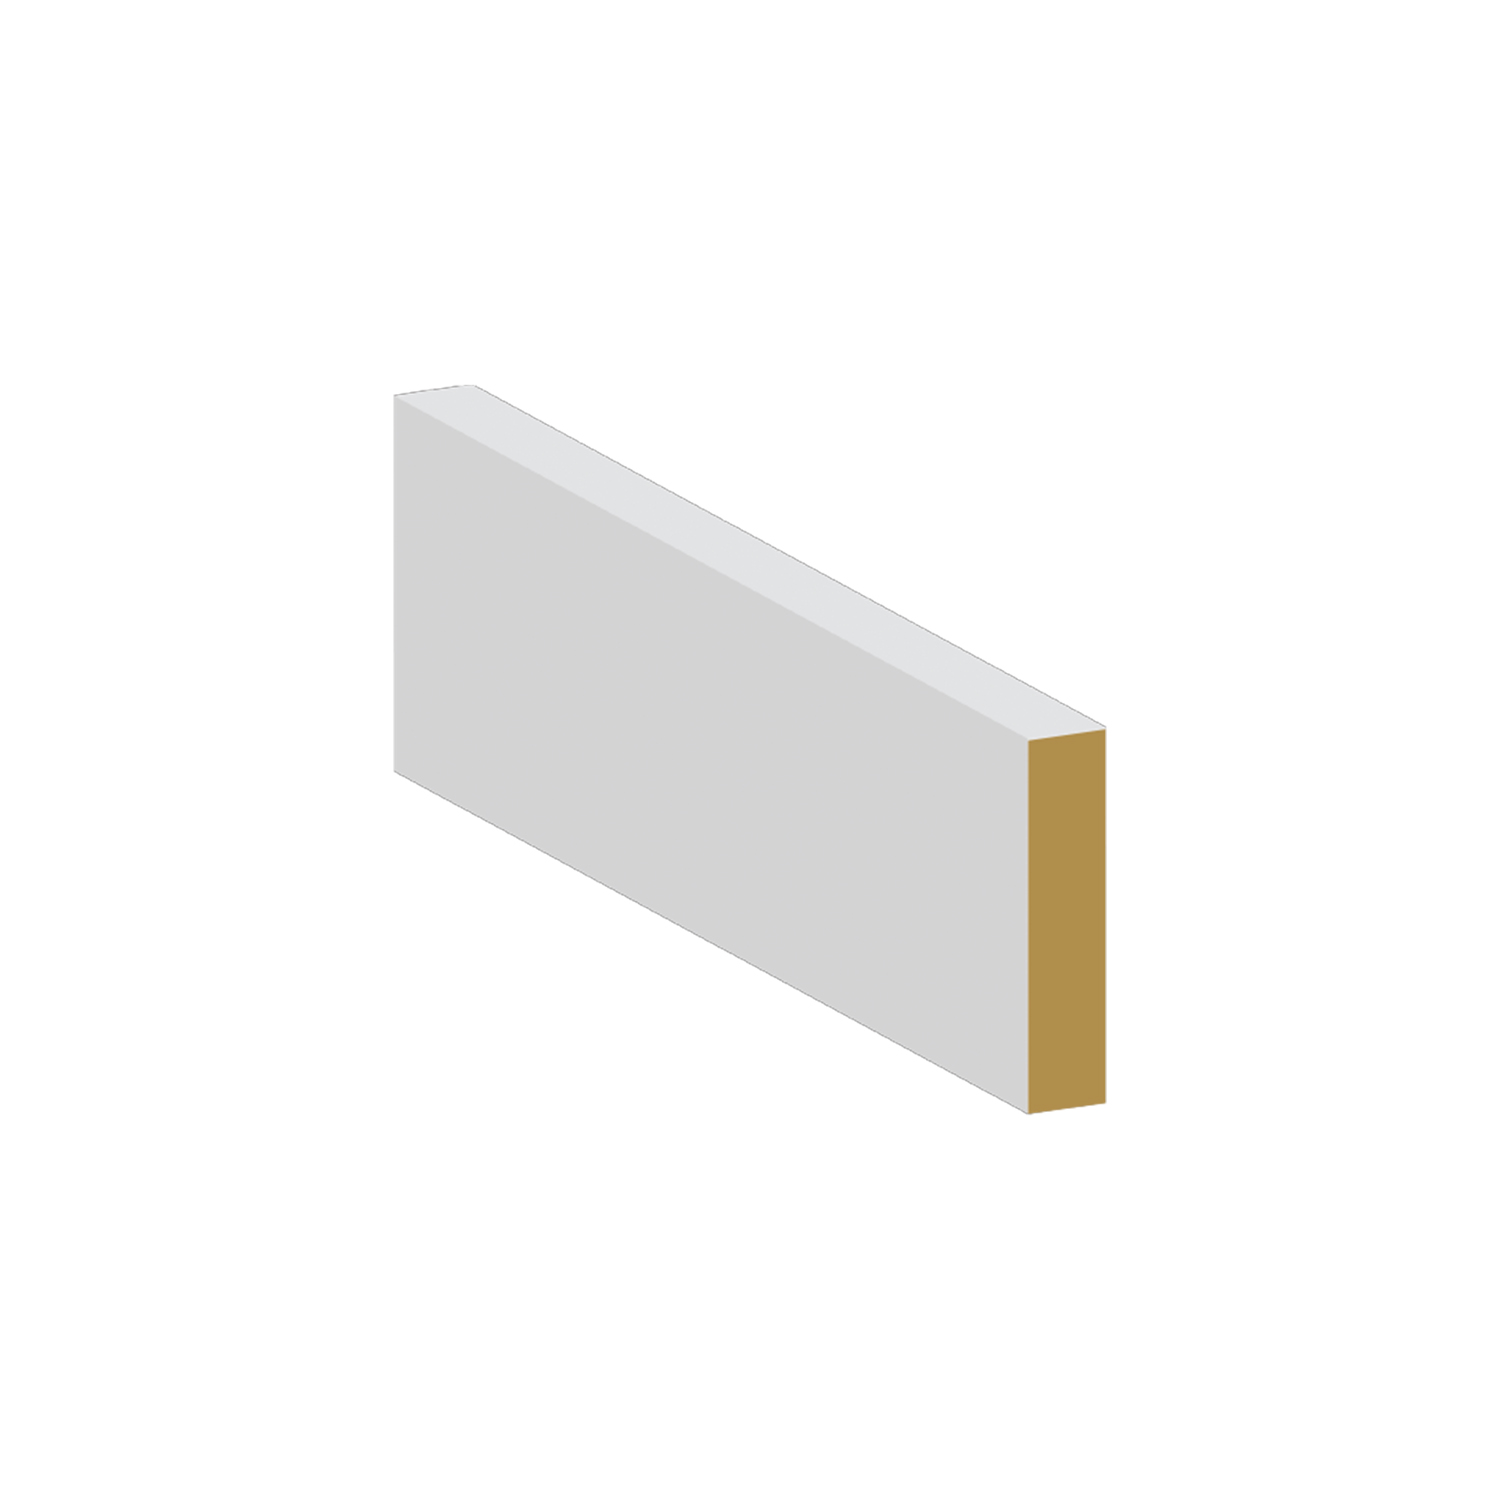 Casing MDF Eased Edge 2 3/4 x 3/4 x 8' - $1.13/LF - SOLD PER PIECE - EACH PIECE IS 8' - $9.00 EACH